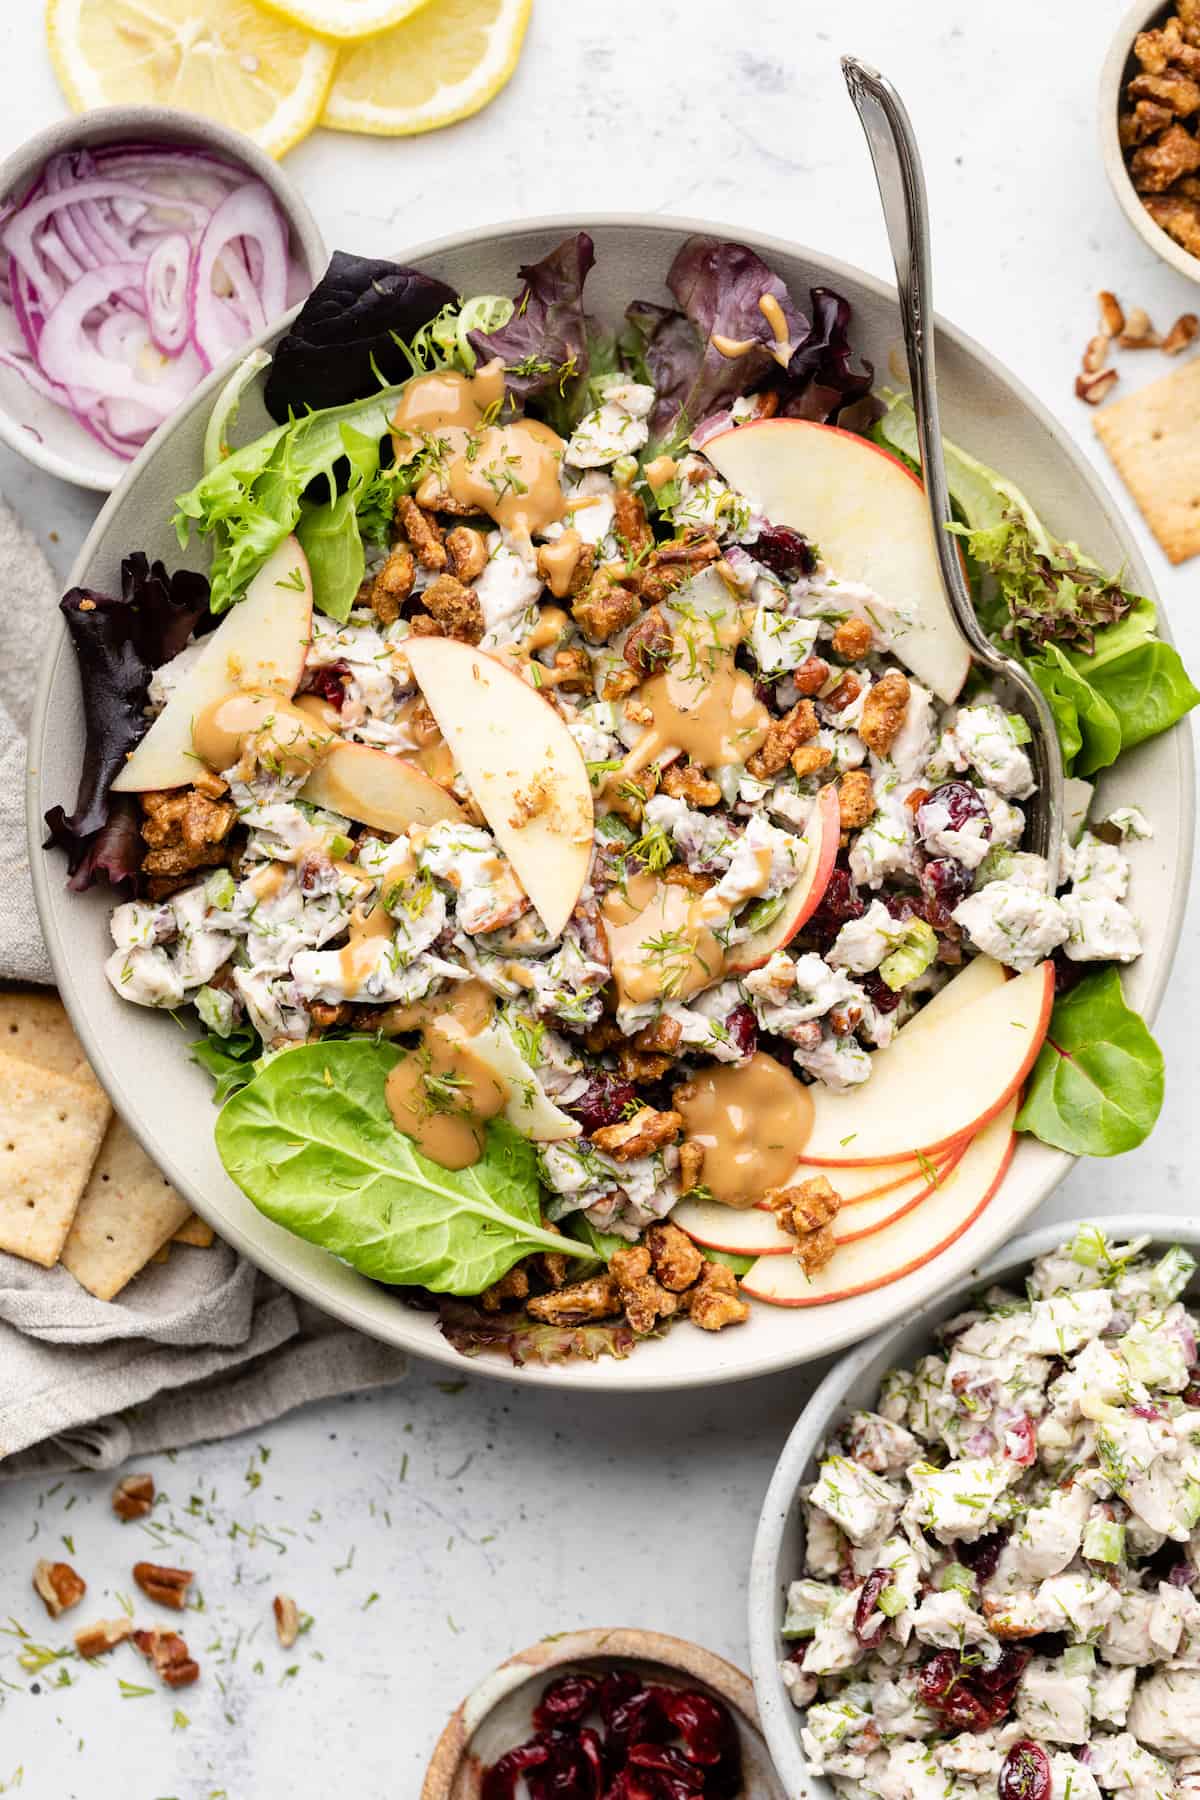 Healthy Homemade Chicken Salad - All the Healthy Things